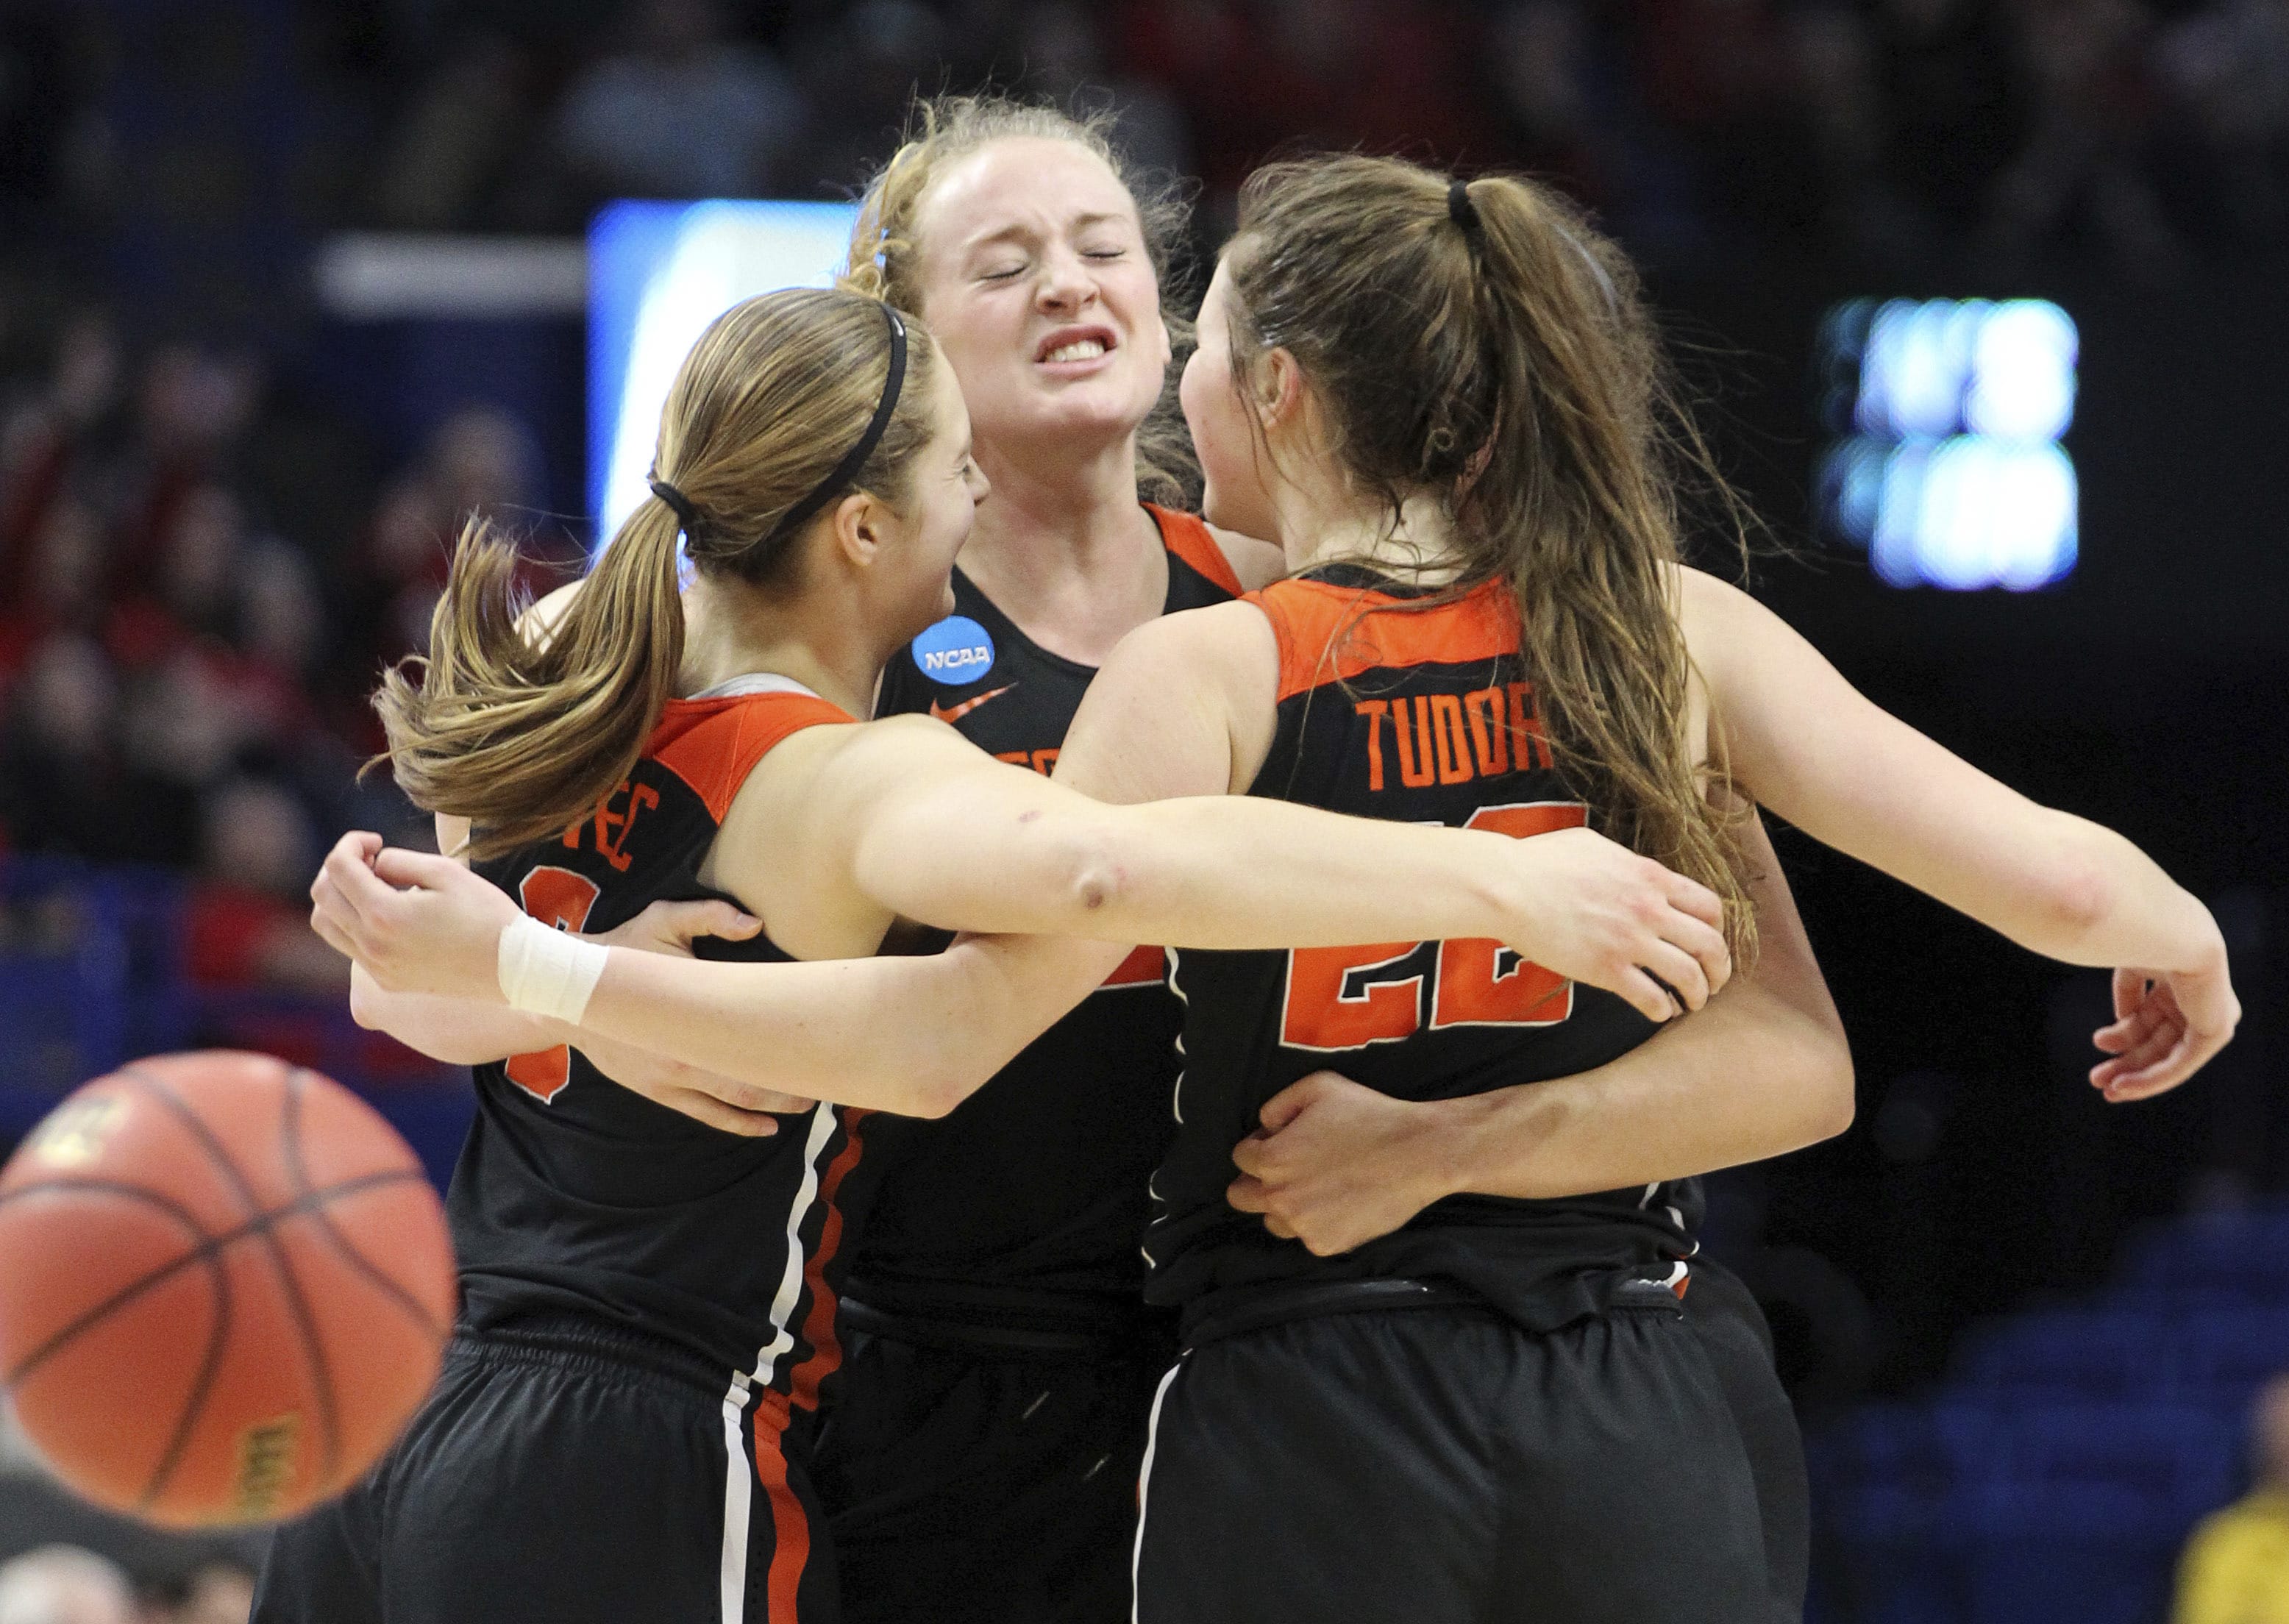 Oregon State's Mikayla Pivec, Marie Gulich and Kat Tudor, from left, celebrate after Oregon upset Baylor in an NCAA women's college basketball tournament regional semifinal Friday, March 23, 2018, in Lexington, Ky.